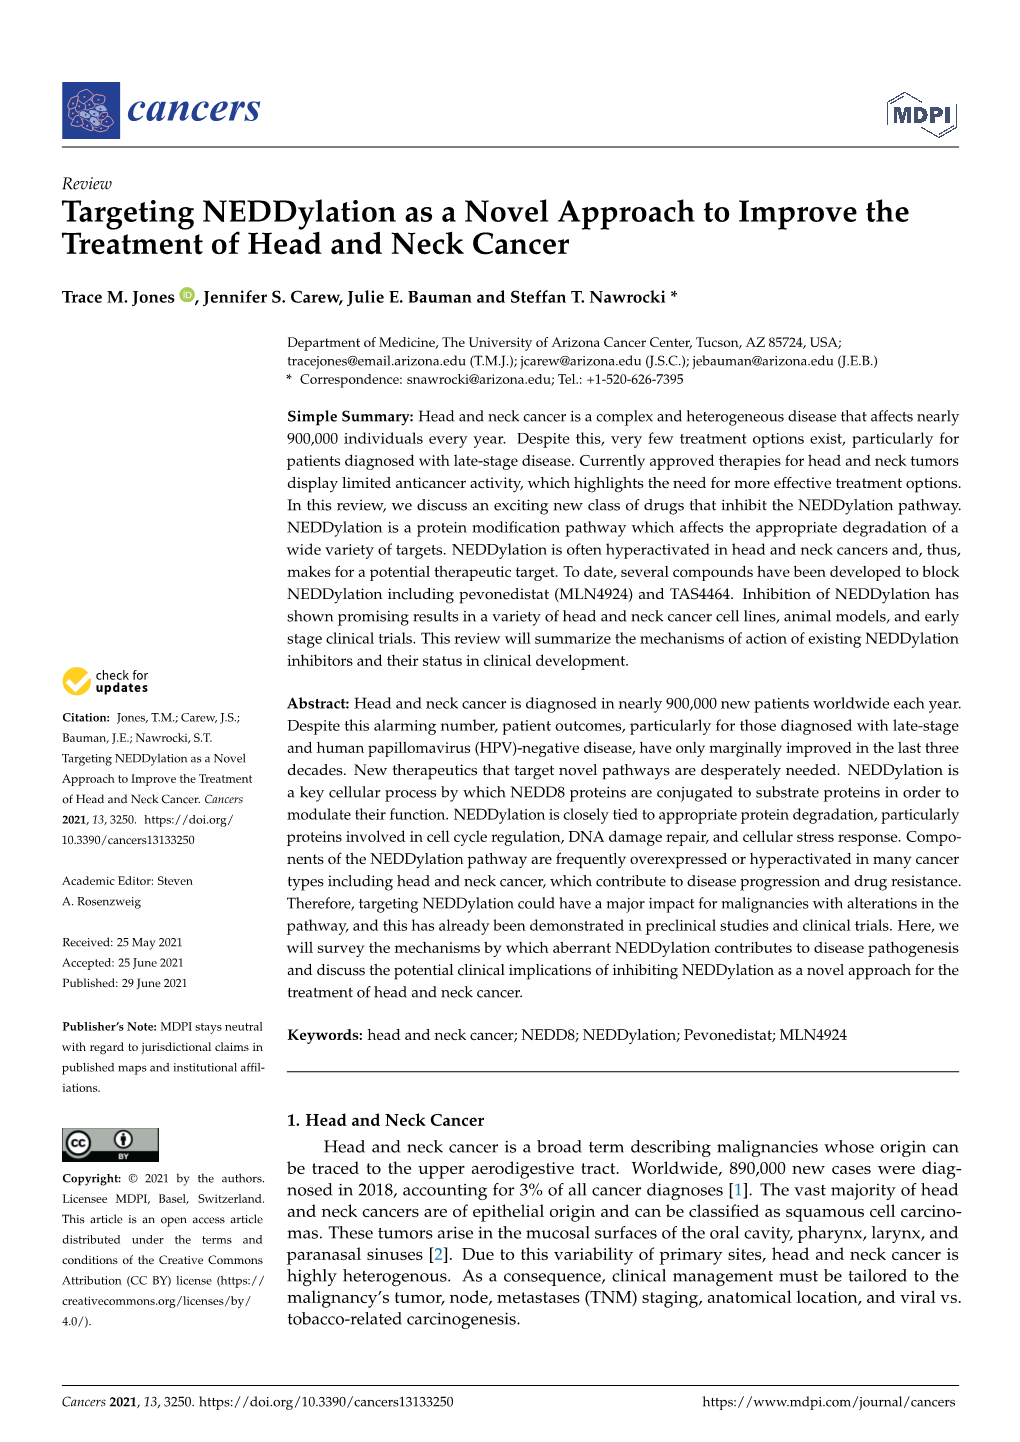 Targeting Neddylation As a Novel Approach to Improve the Treatment of Head and Neck Cancer